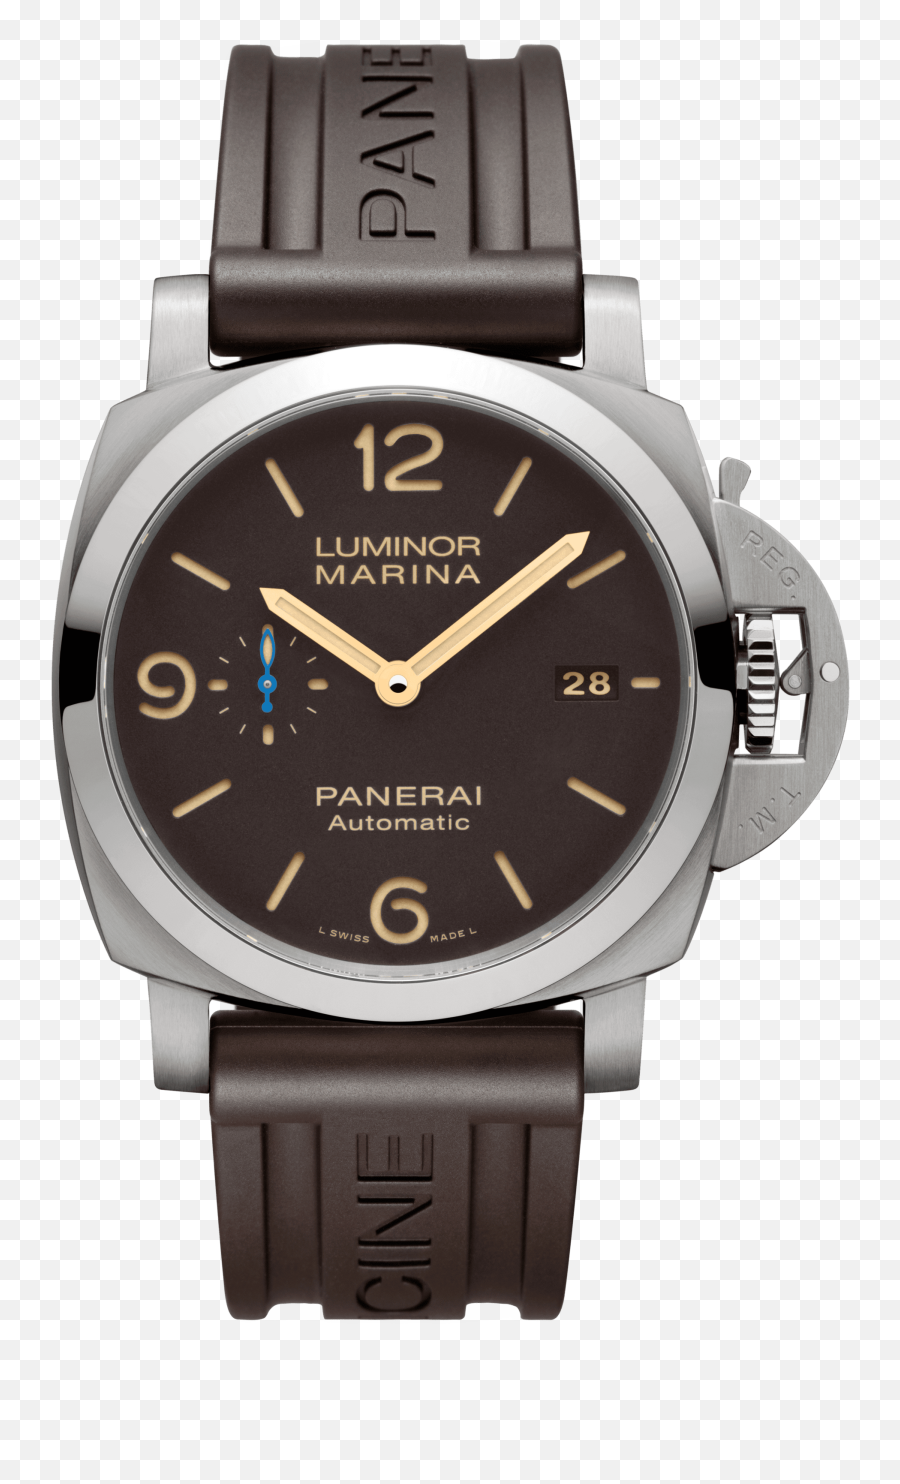 Fake Watches Dhgate Archives - Top Quality Rolex Replica Panerai Luminor Marina Emoji,Mood Color Changing Watch By Emotions Clock